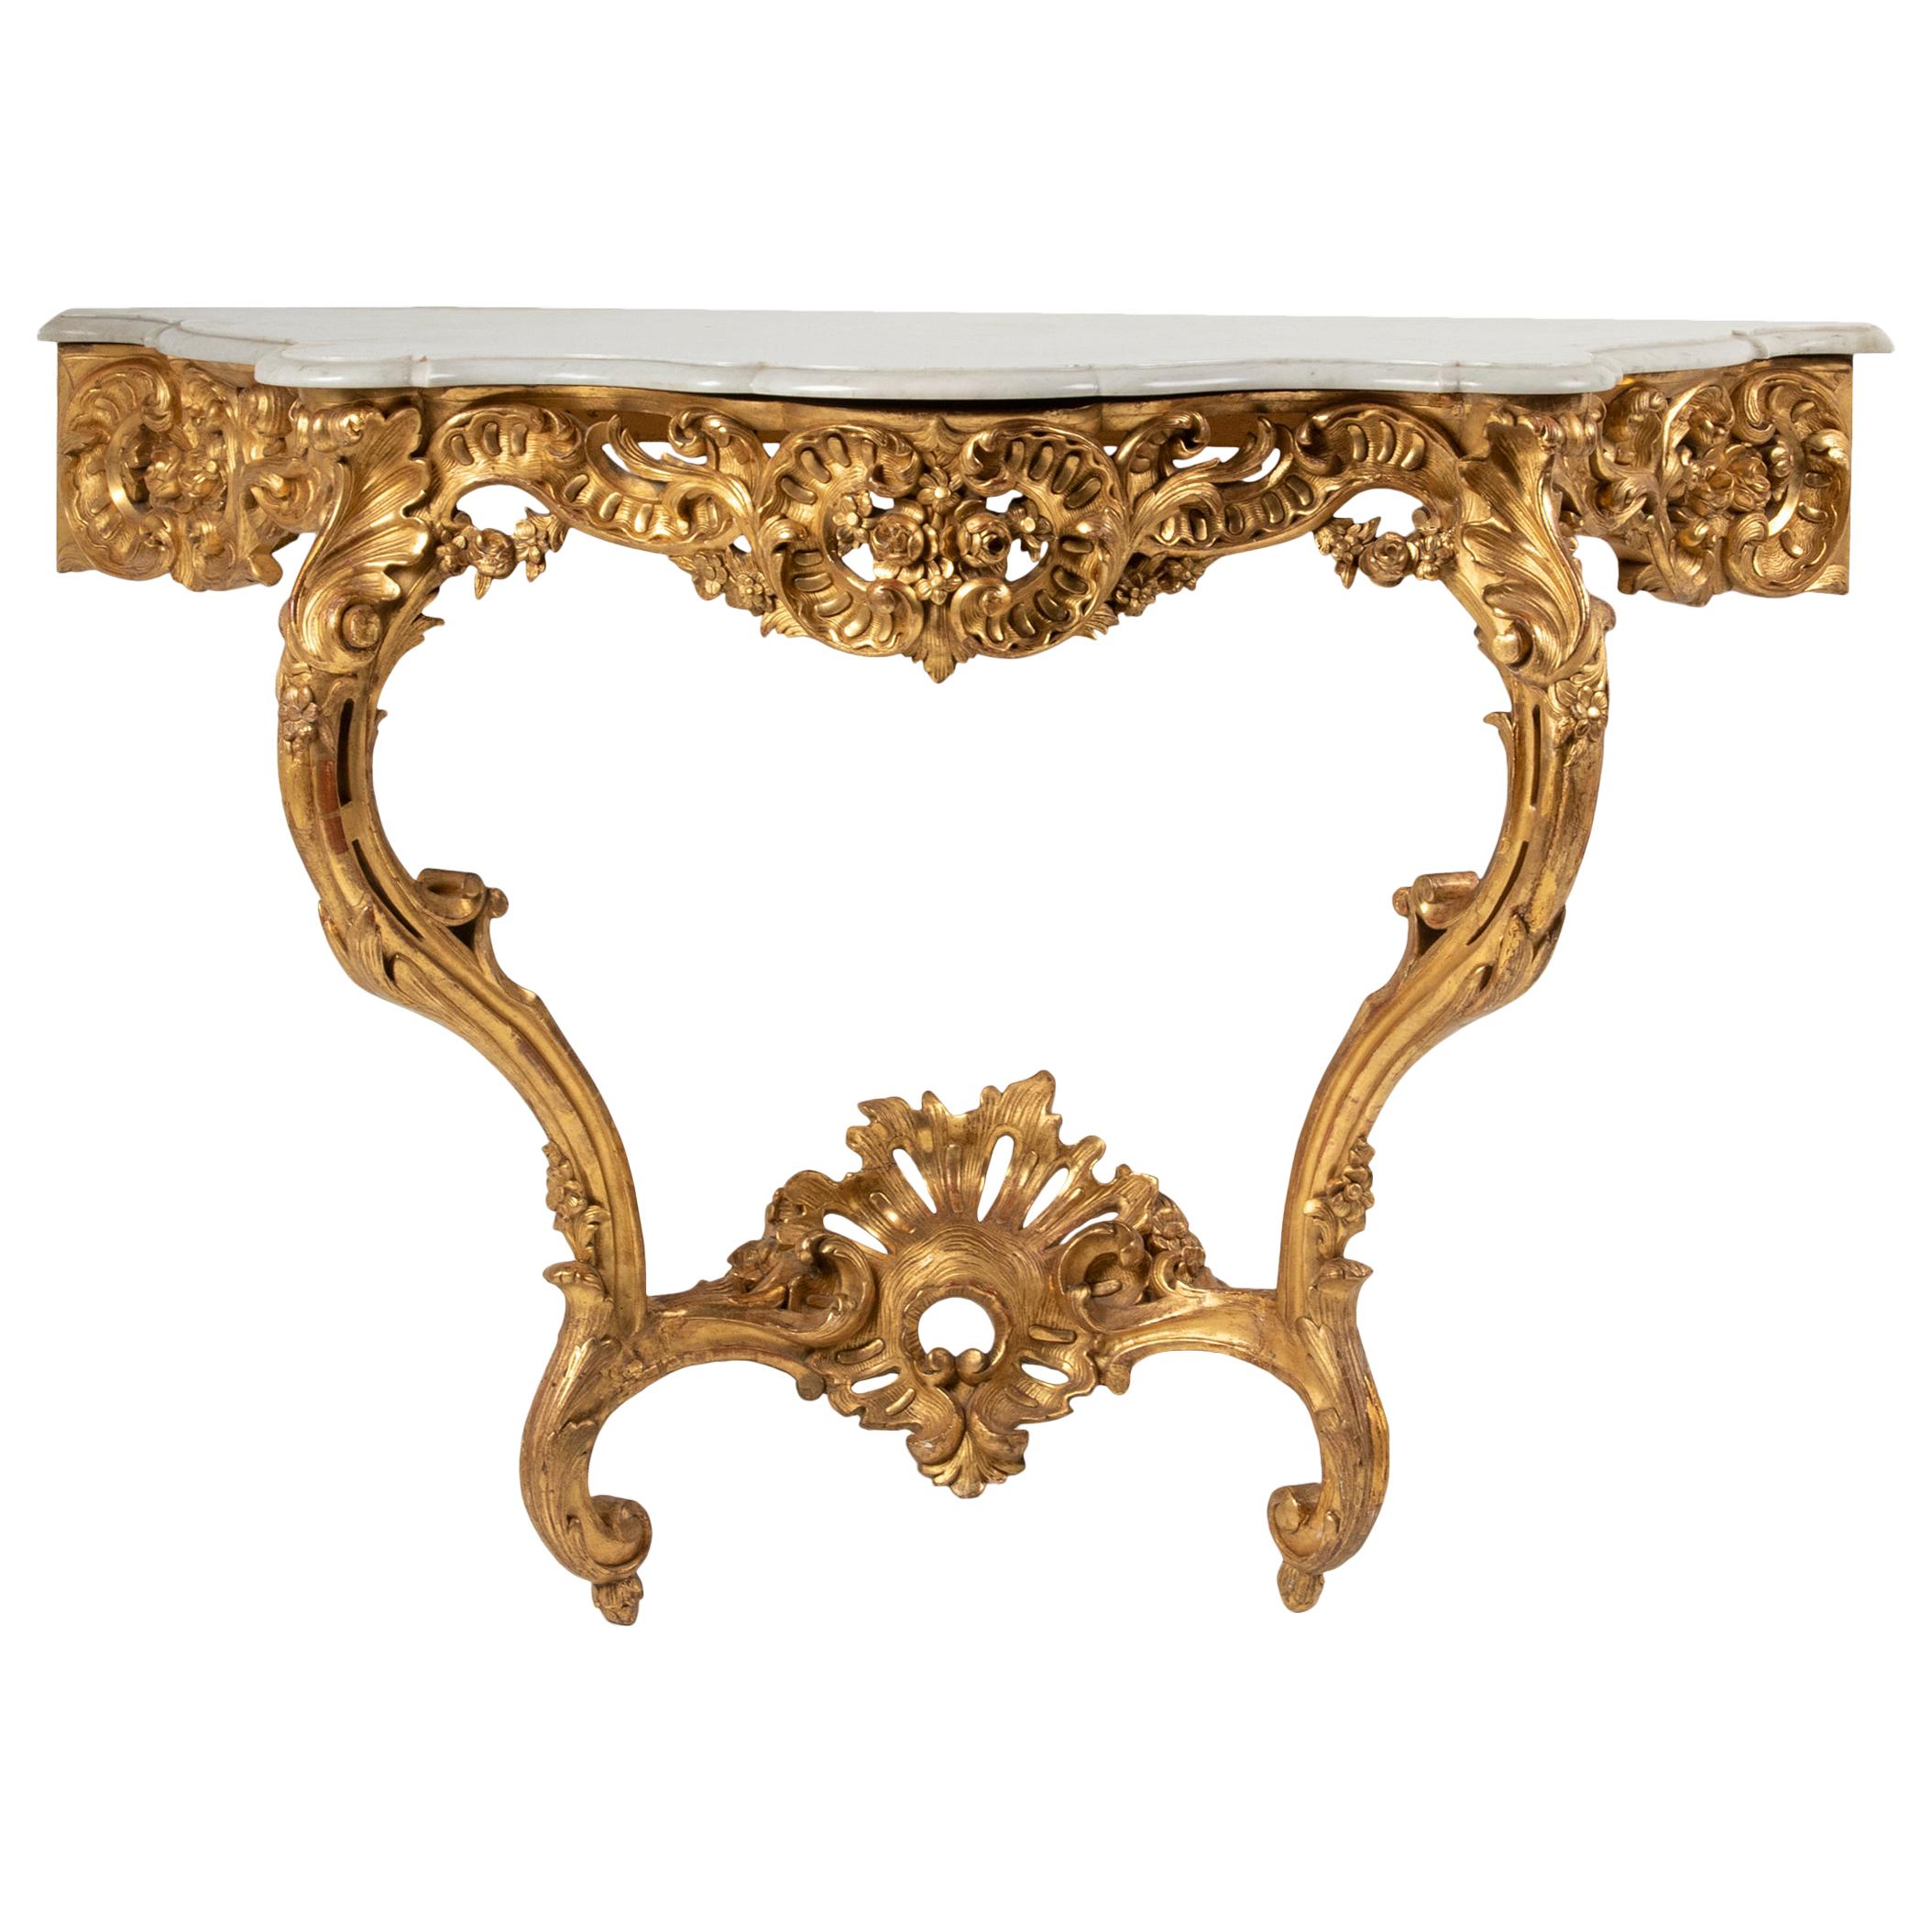 19th Century French Wooden Carved and Gilded Console Table by Maison Janiaud